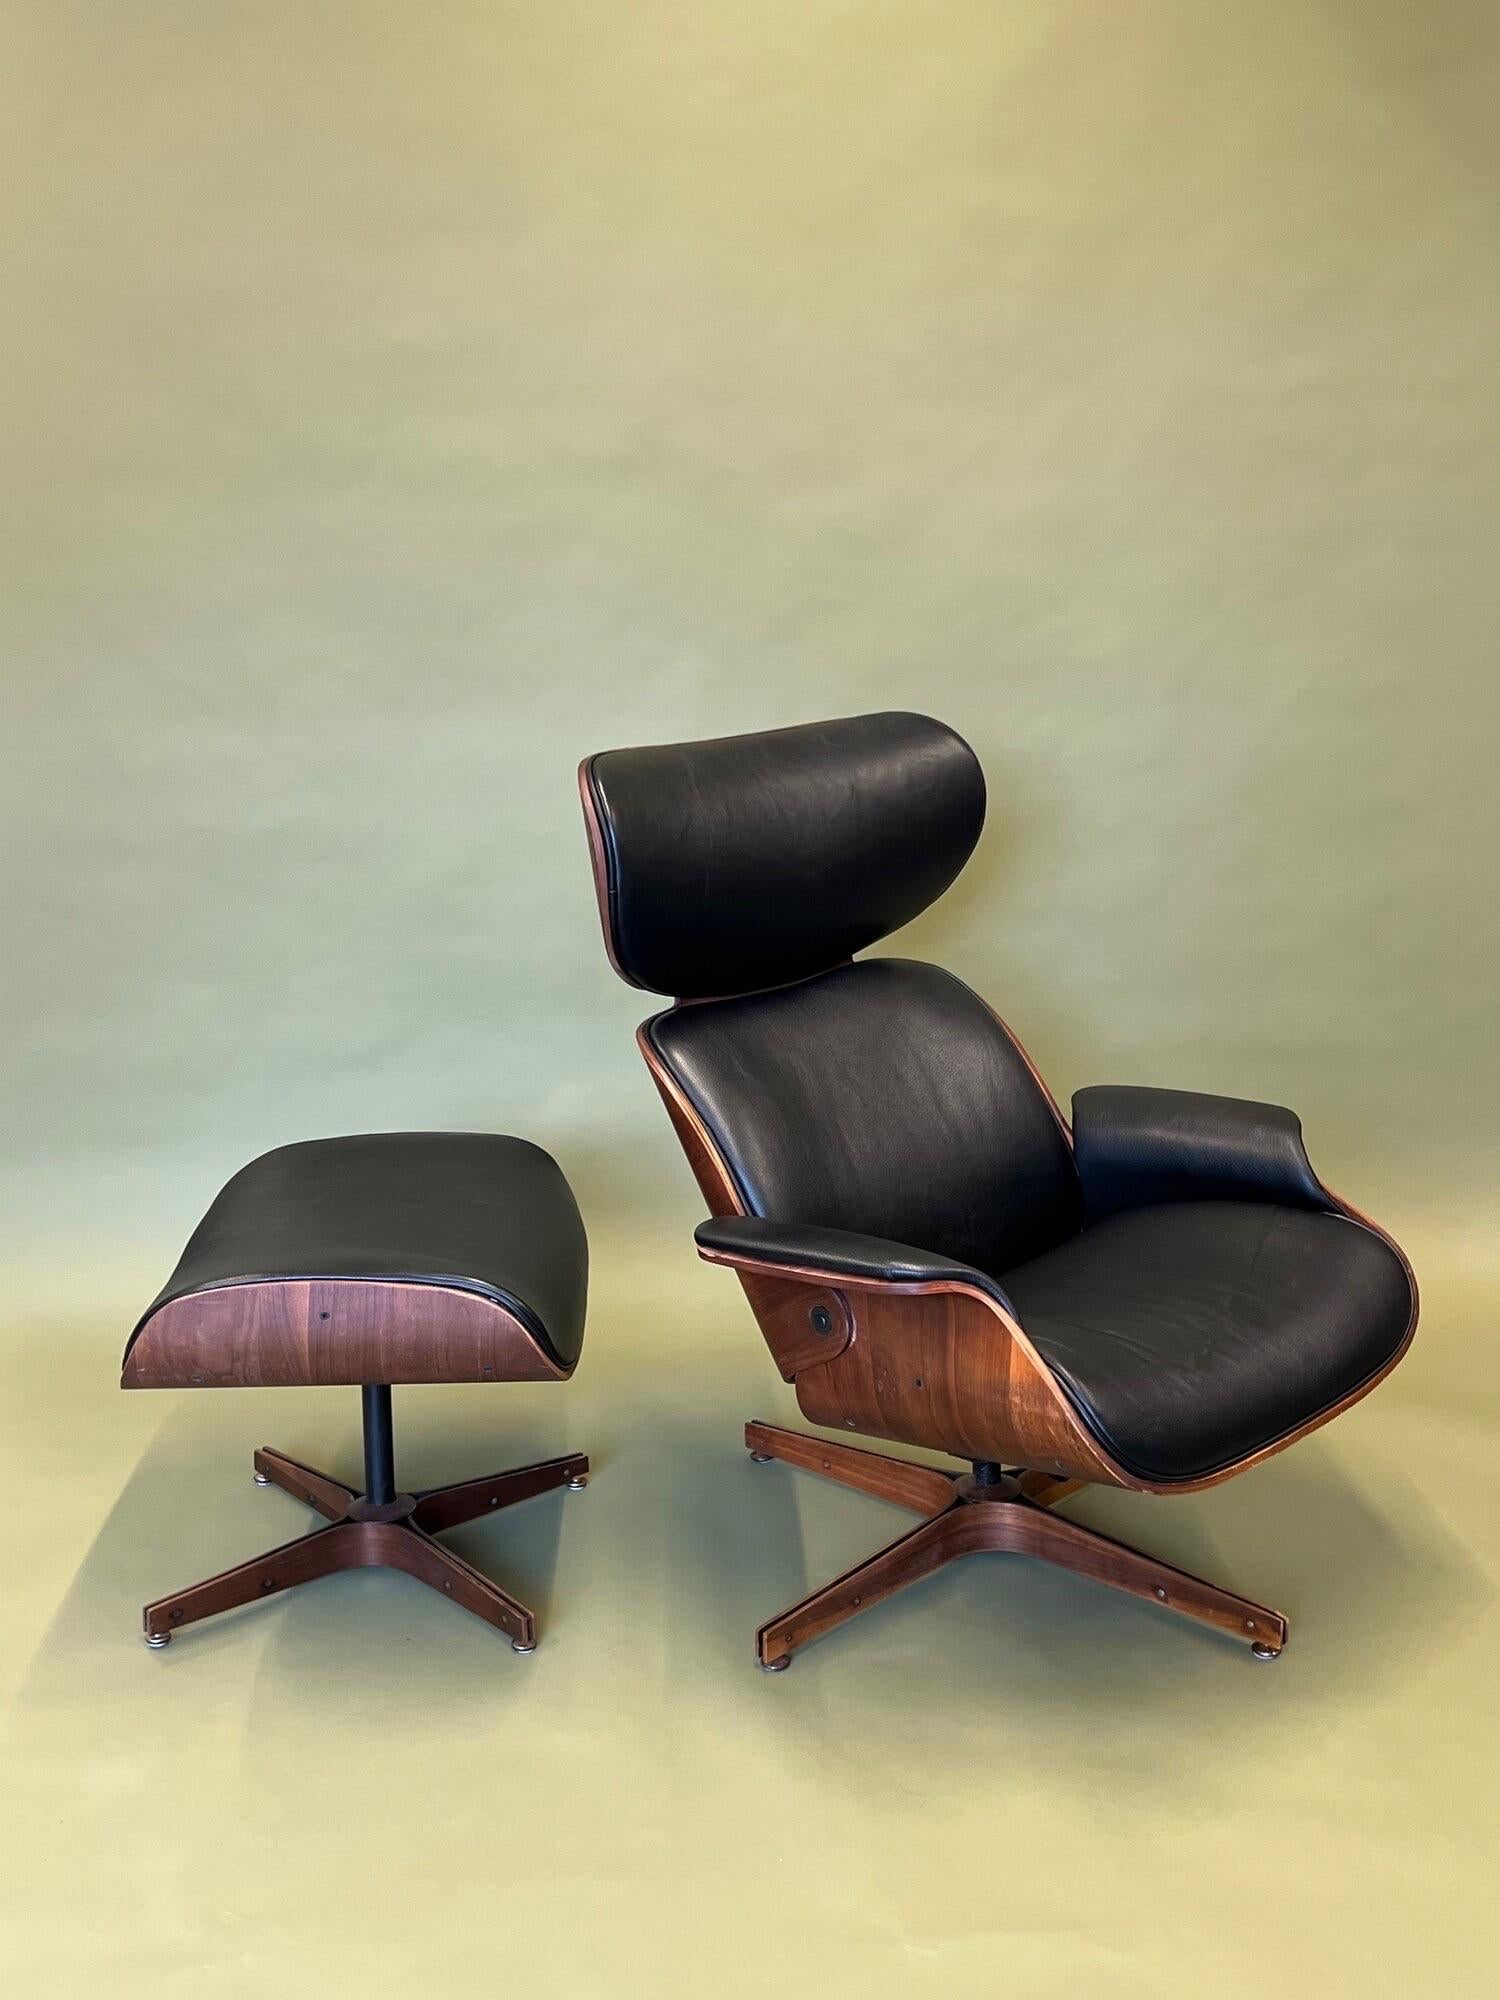 A fantastic statement piece from the mid century. The Mr. chair reclines and swivels and is upholstered in black leather. This iconic lounge is a great addition to any interior. Very comfy and plenty of life left. I’m overall great condition with